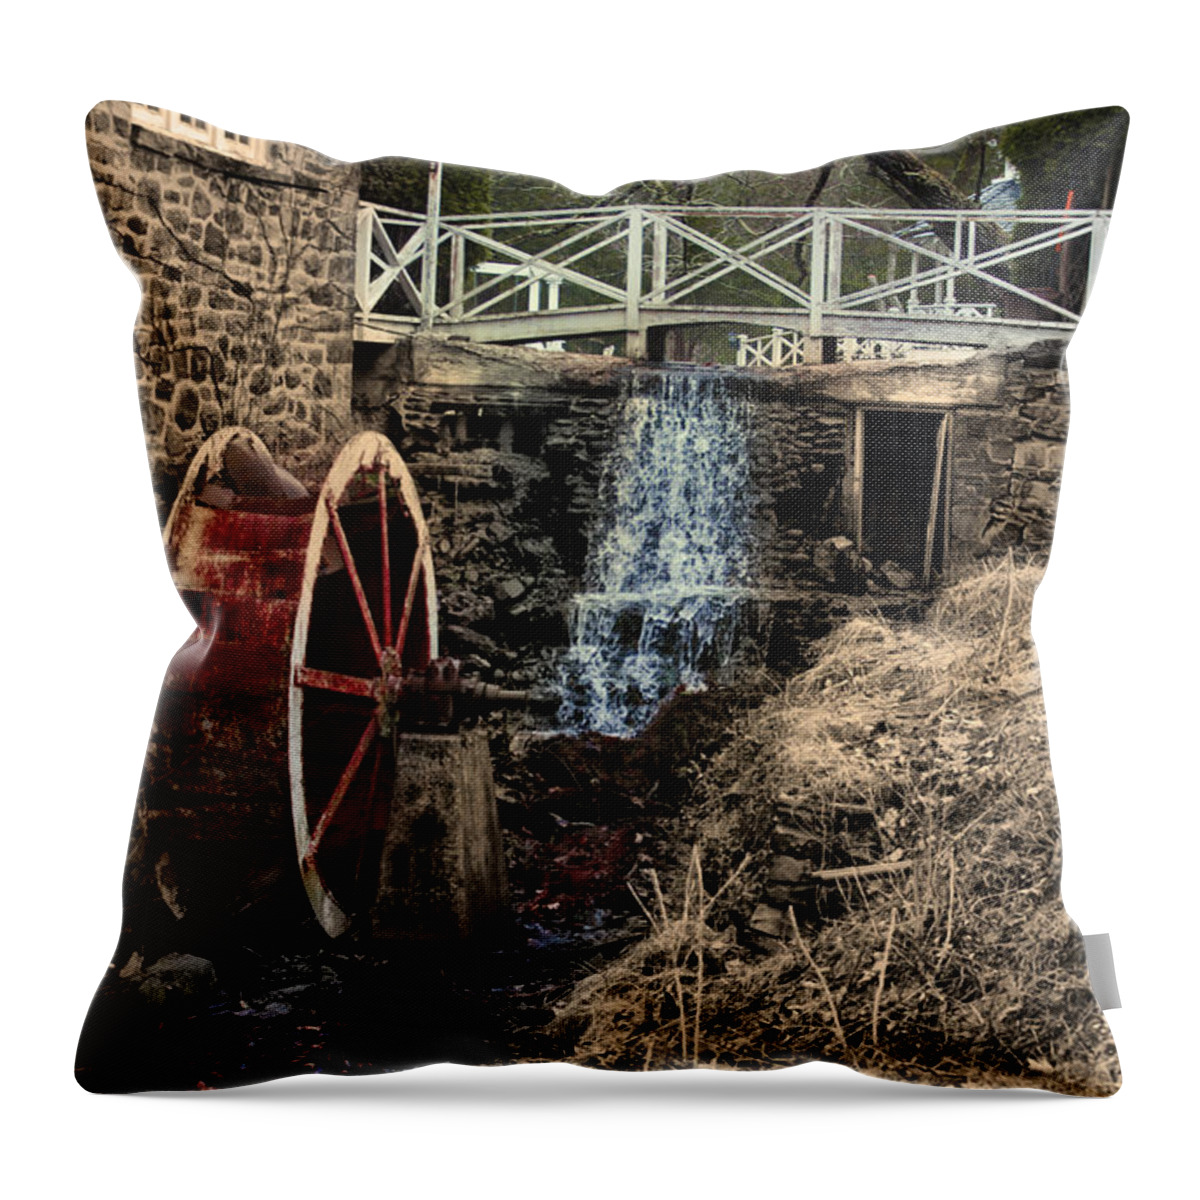 West Throw Pillow featuring the photograph West Trenton Water Wheel by Bill Cannon